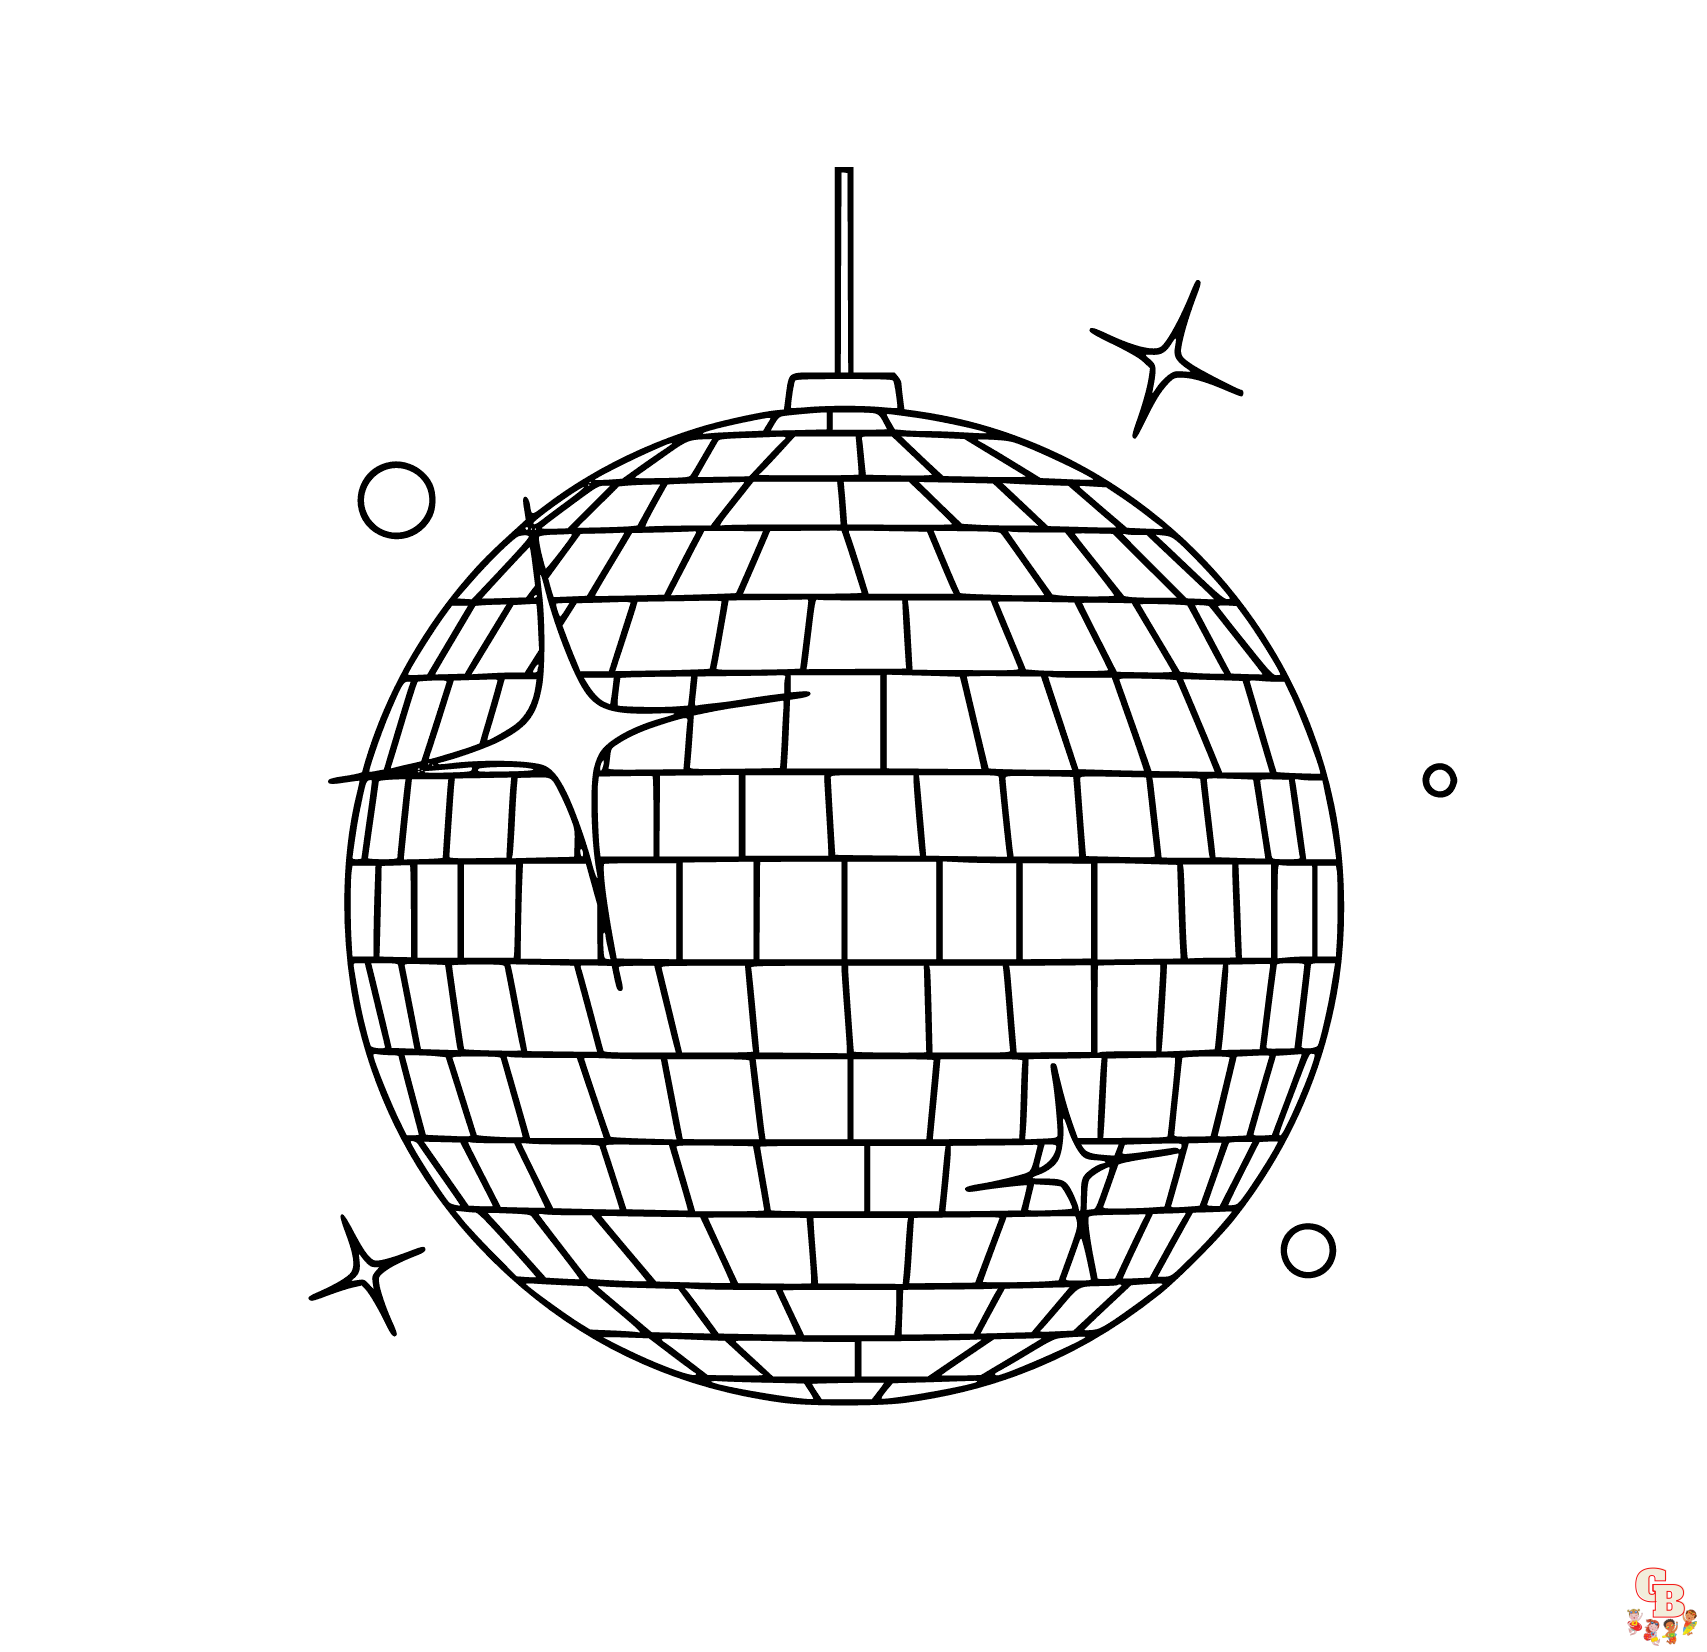 Printabe disco ball coloring pages free for kids and adults